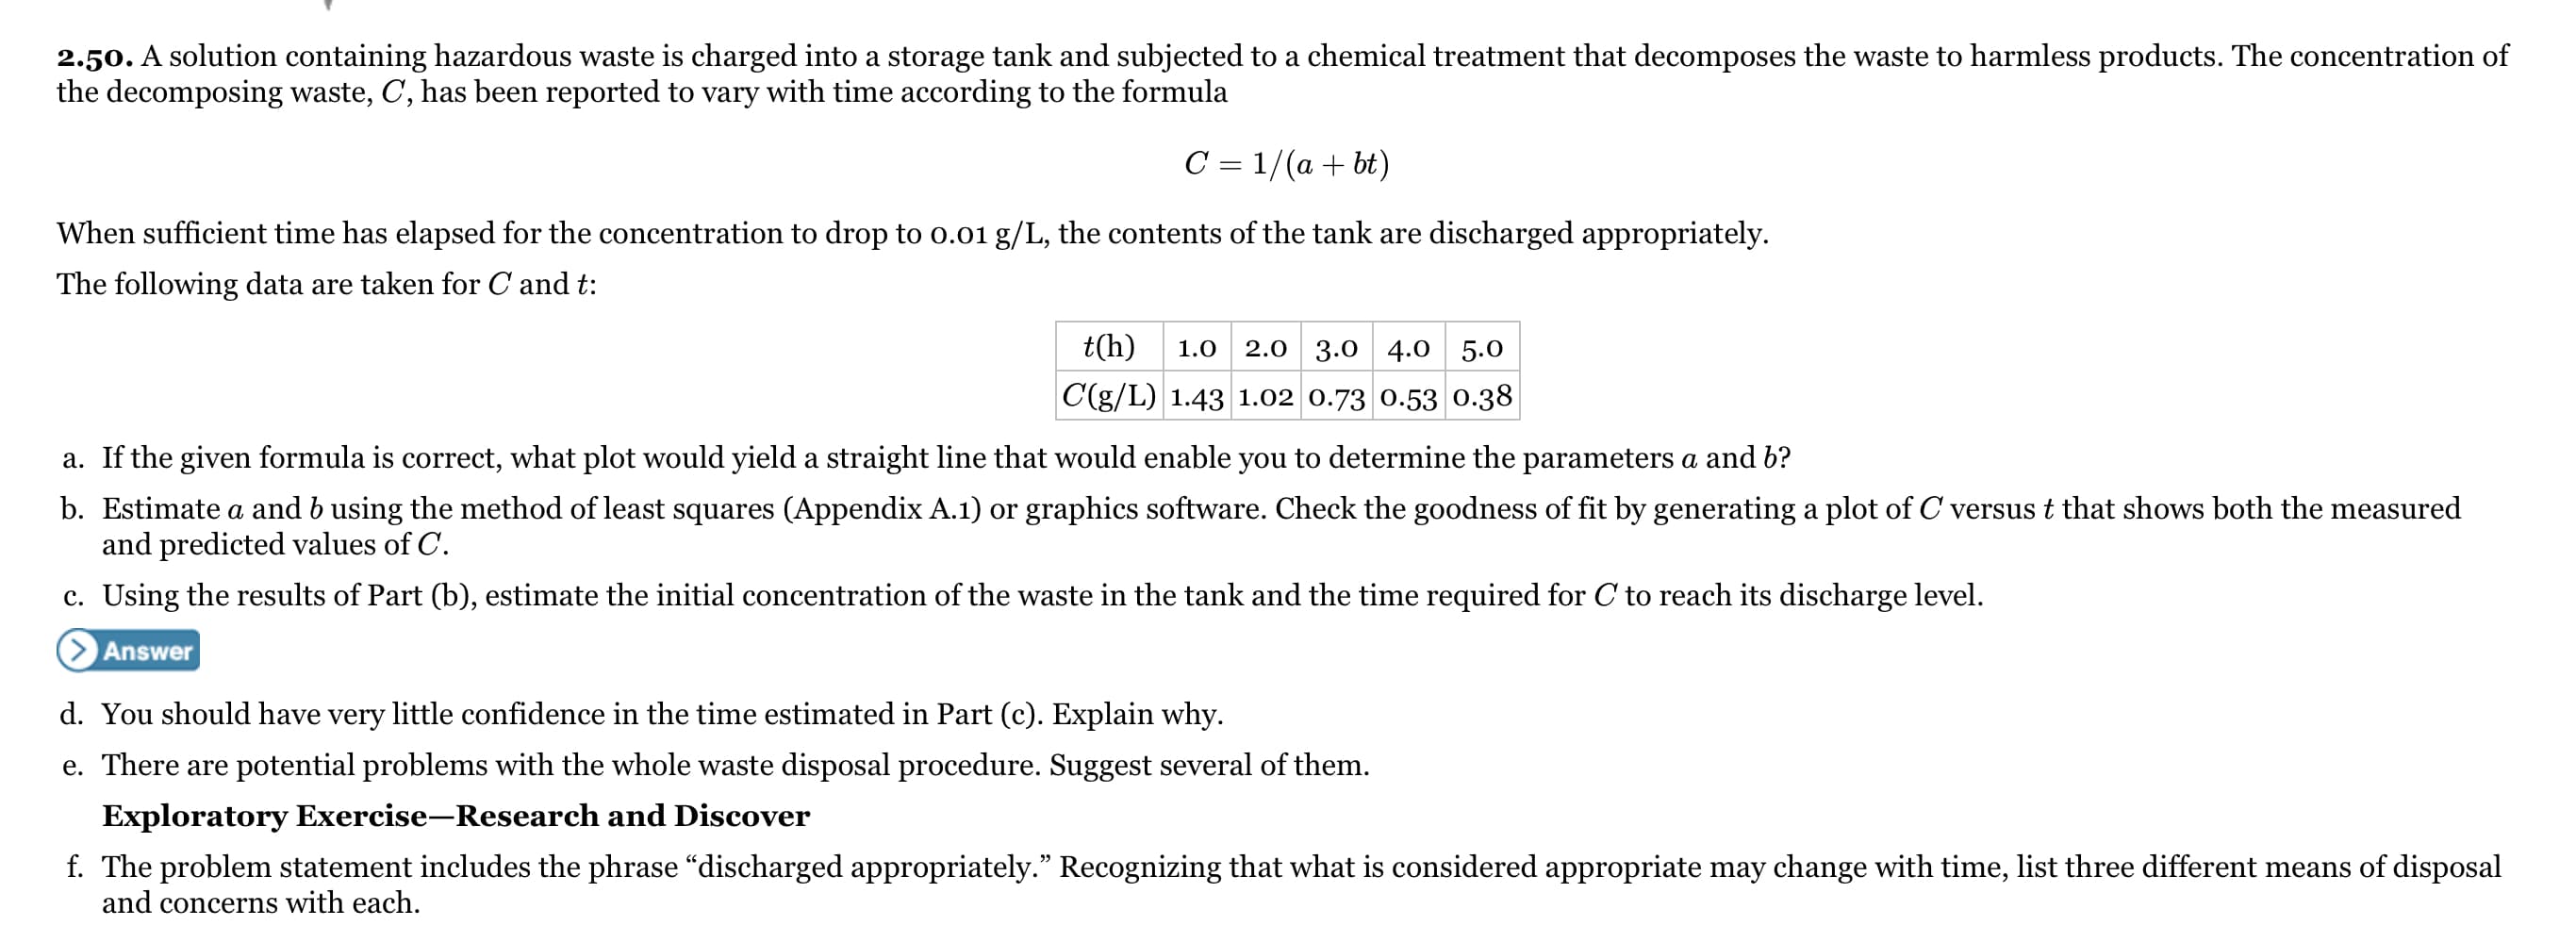 2.50. A solution containing hazardous waste is charged into a storage tank and subjected to a chemical treatment that decomposes the waste to harmless products. The concentration of
the decomposing waste, C, has been reported to vary with time according to the formula
C = 1/(a + bt)
When sufficient time has elapsed for the concentration to drop to o.01 g/L, the contents of the tank are discharged appropriately.
The following data are taken for C and t:
t(h)
1.0
2.0 3.0 4.0 5.0
C(g/L) 1.43 1.02 0.73 0.53 0.38
a. If the given formula is correct, what plot would yield a straight line that would enable you to determine the parameters a and b?
b. Estimate a and b using the method of least squares (Appendix A.1) or graphics software. Check the goodness of fit by generating a plot of C versus t that shows both the measured
and predicted values of C.
c. Using the results of Part (b), estimate the initial concentration of the waste in the tank and the time required for C to reach its discharge level.
Answer
d. You should have very little confidence in the time estimated in Part (c). Explain why.
e. There are potential problems with the whole waste disposal procedure. Suggest several of them.
Exploratory Exercise-Research and Discover
f. The problem statement includes the phrase "discharged appropriately." Recognizing that what is considered appropriate may change with time, list three different means of disposal
and concerns with each.
